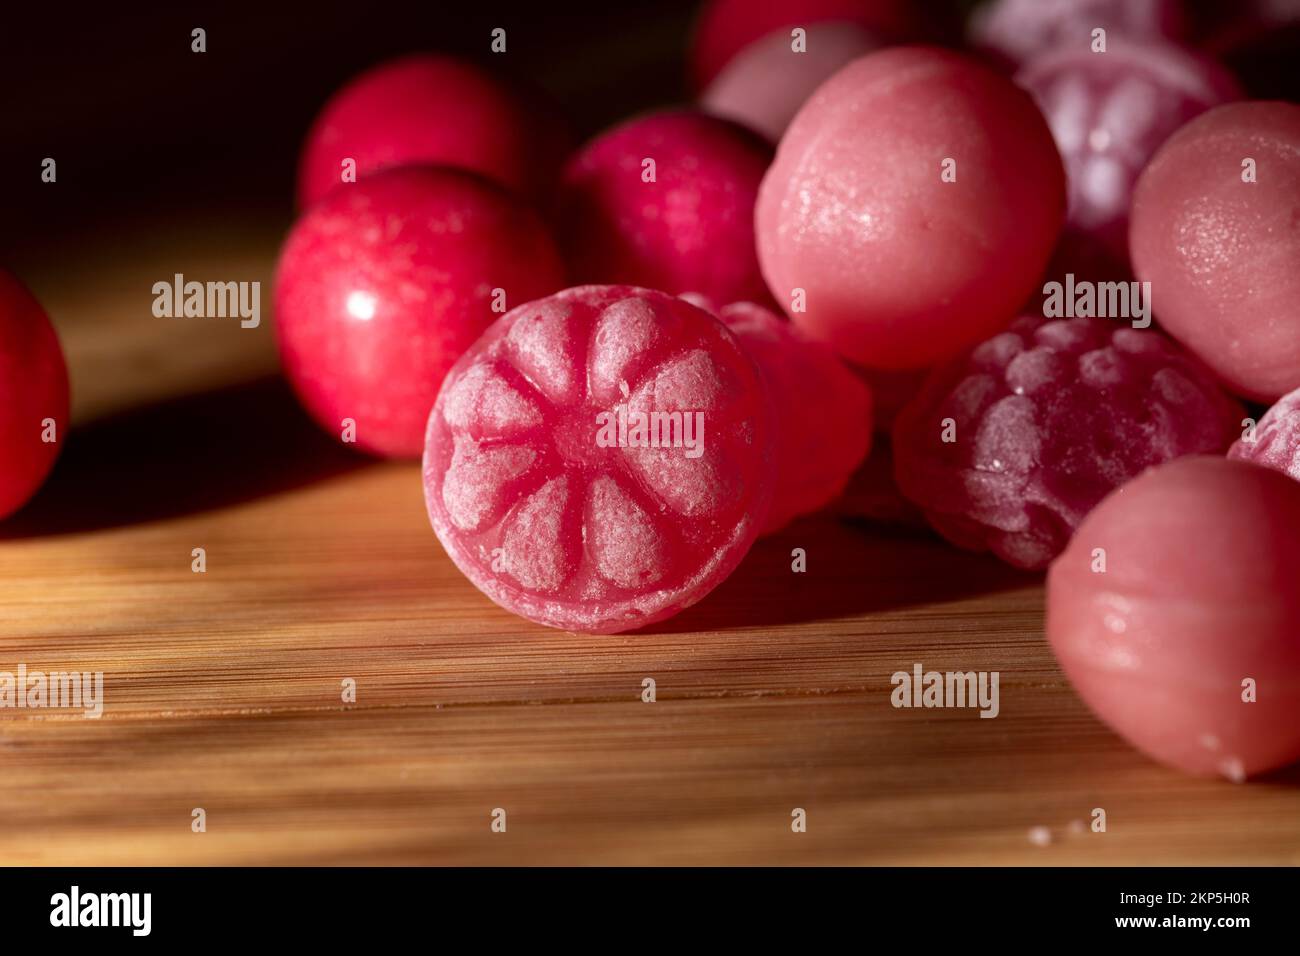 The macro shot of pink raspberry-flavored candies over the wooden surface Stock Photo